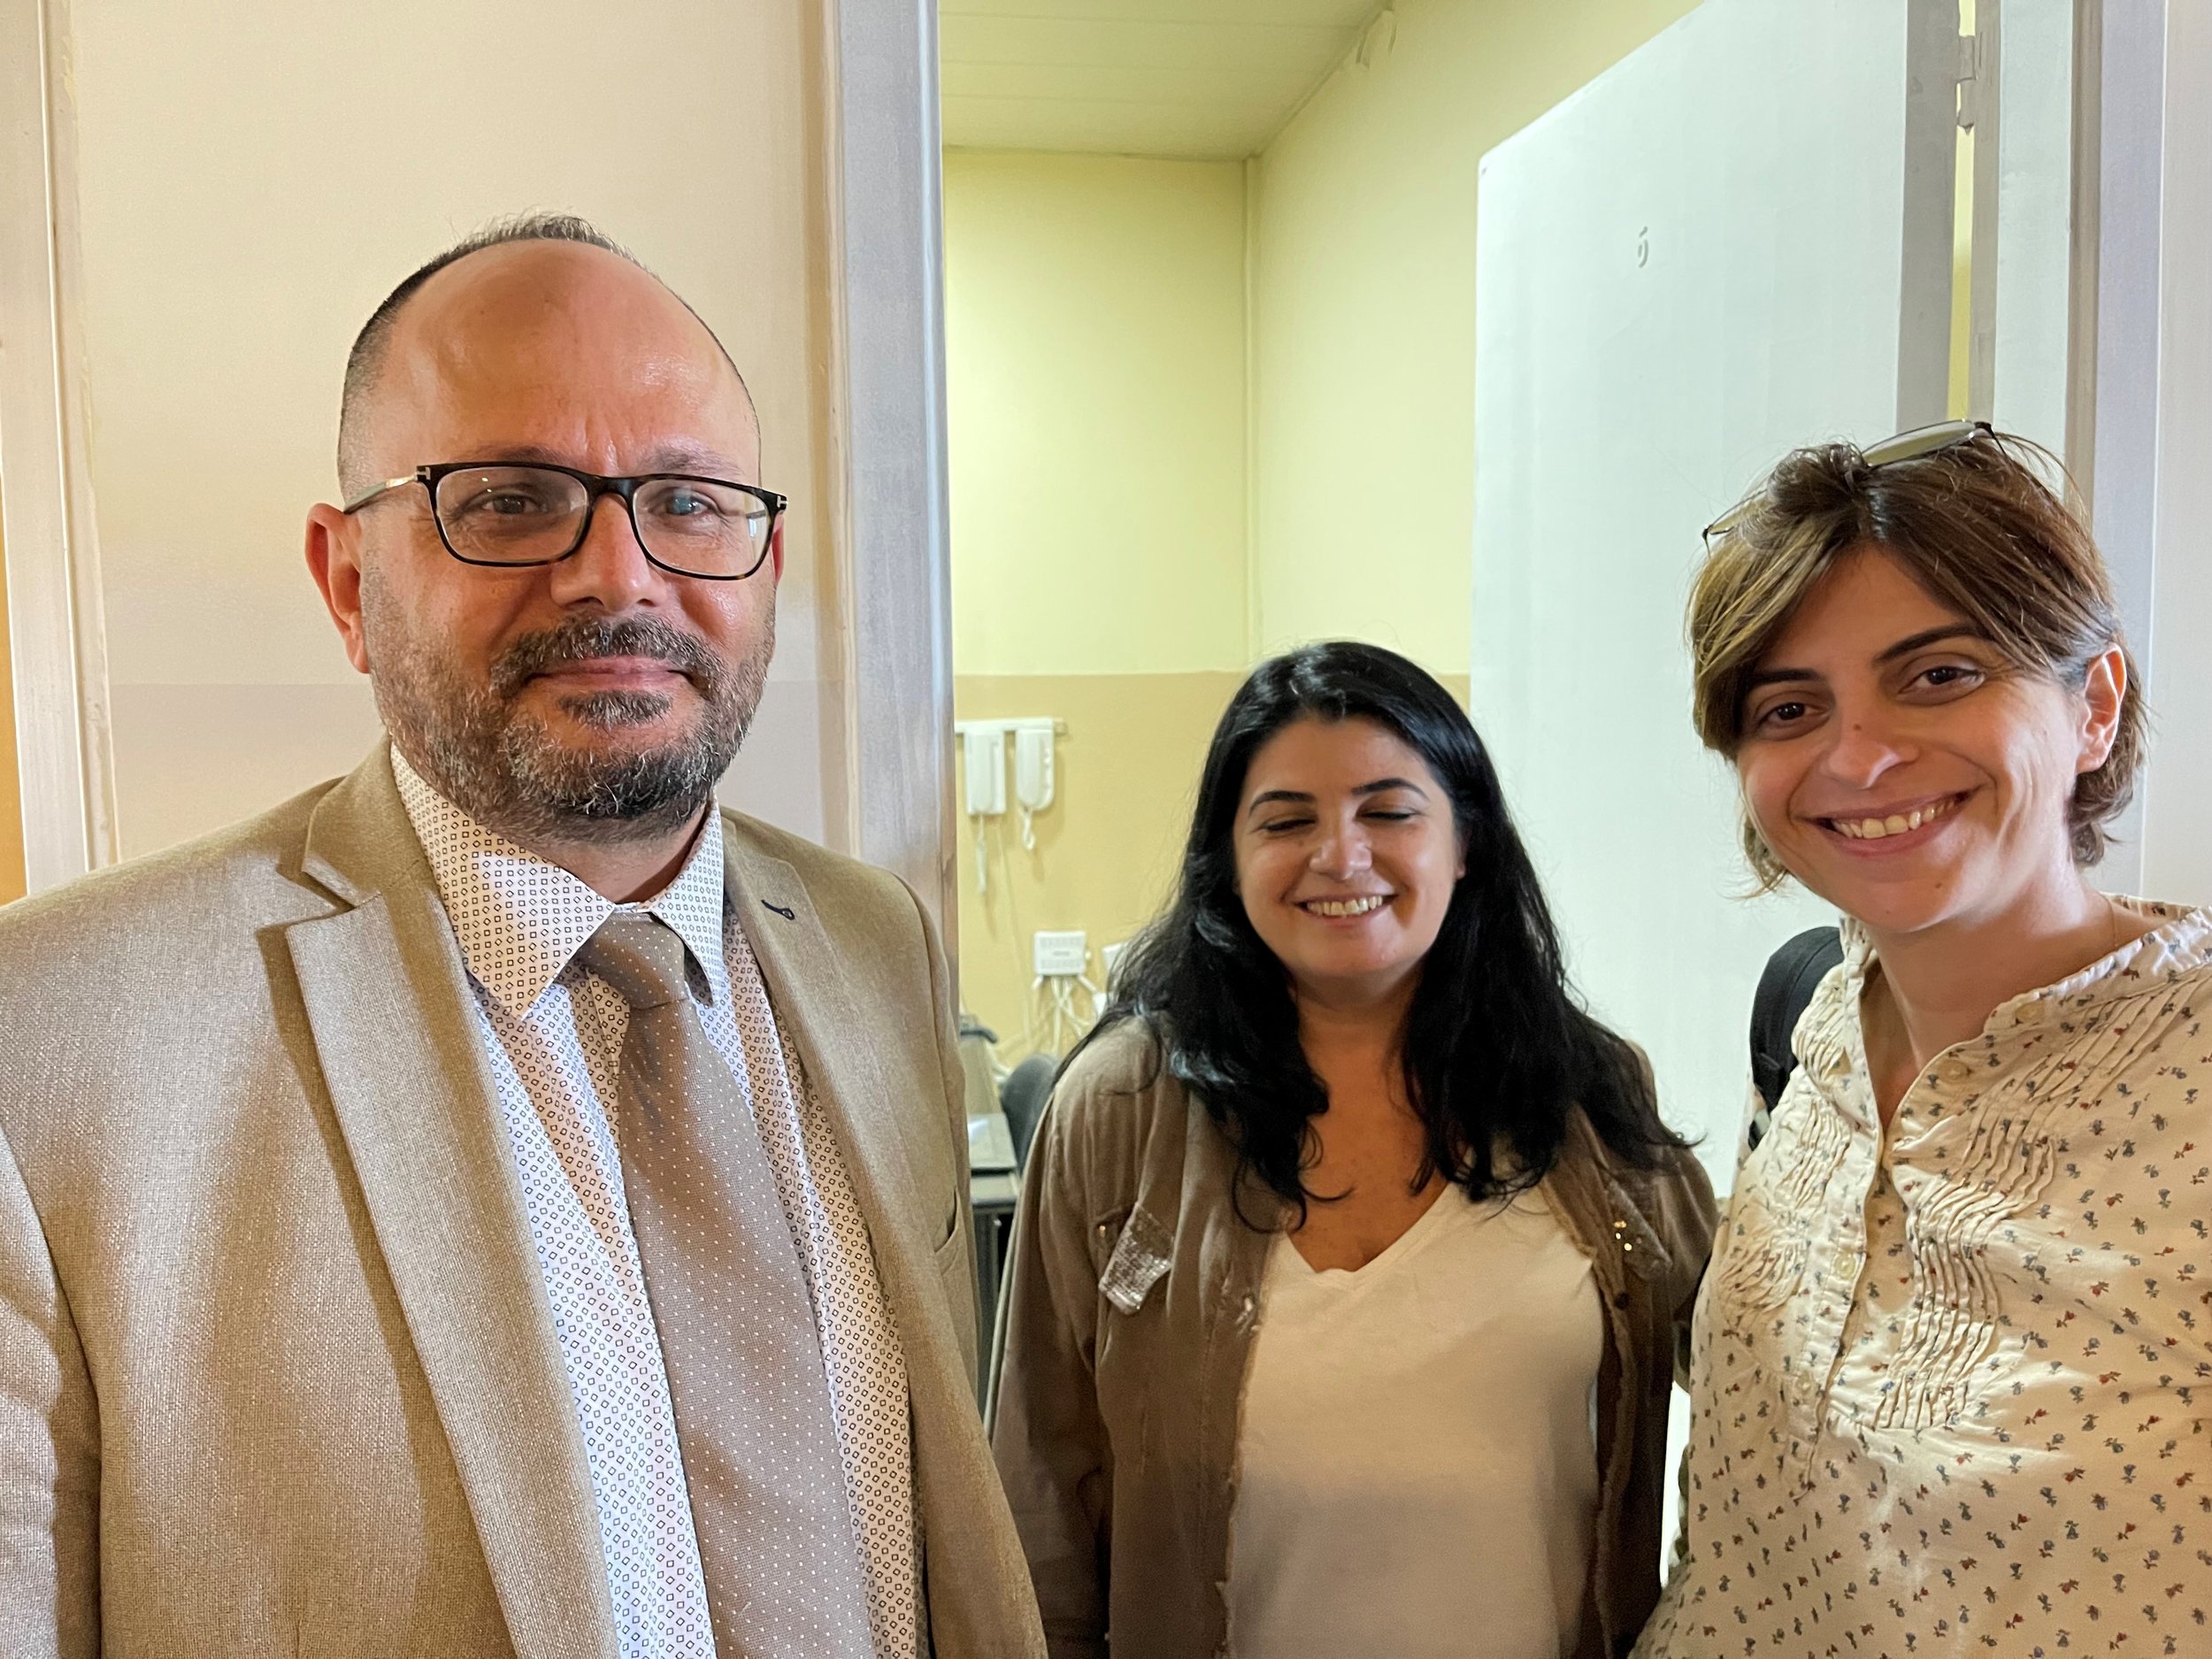  Saints who serve “the least of these: Tony Haddad (left ) Linda Maktaby (right) and one of the dedicated staff at Home of Hope (center) 